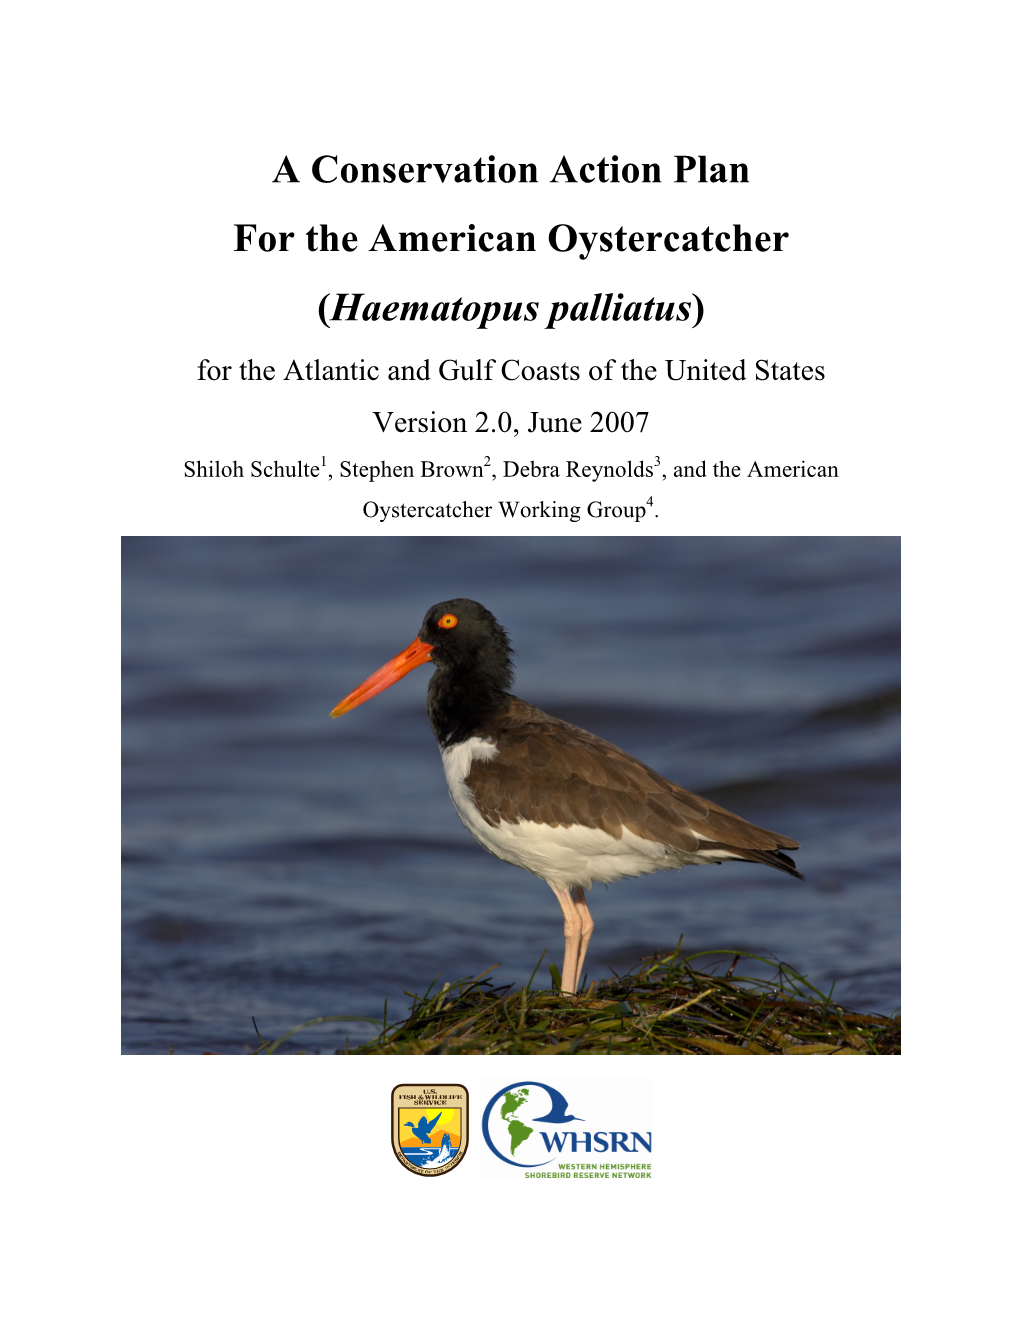 A Conservation Action Plan for the American Oystercatcher